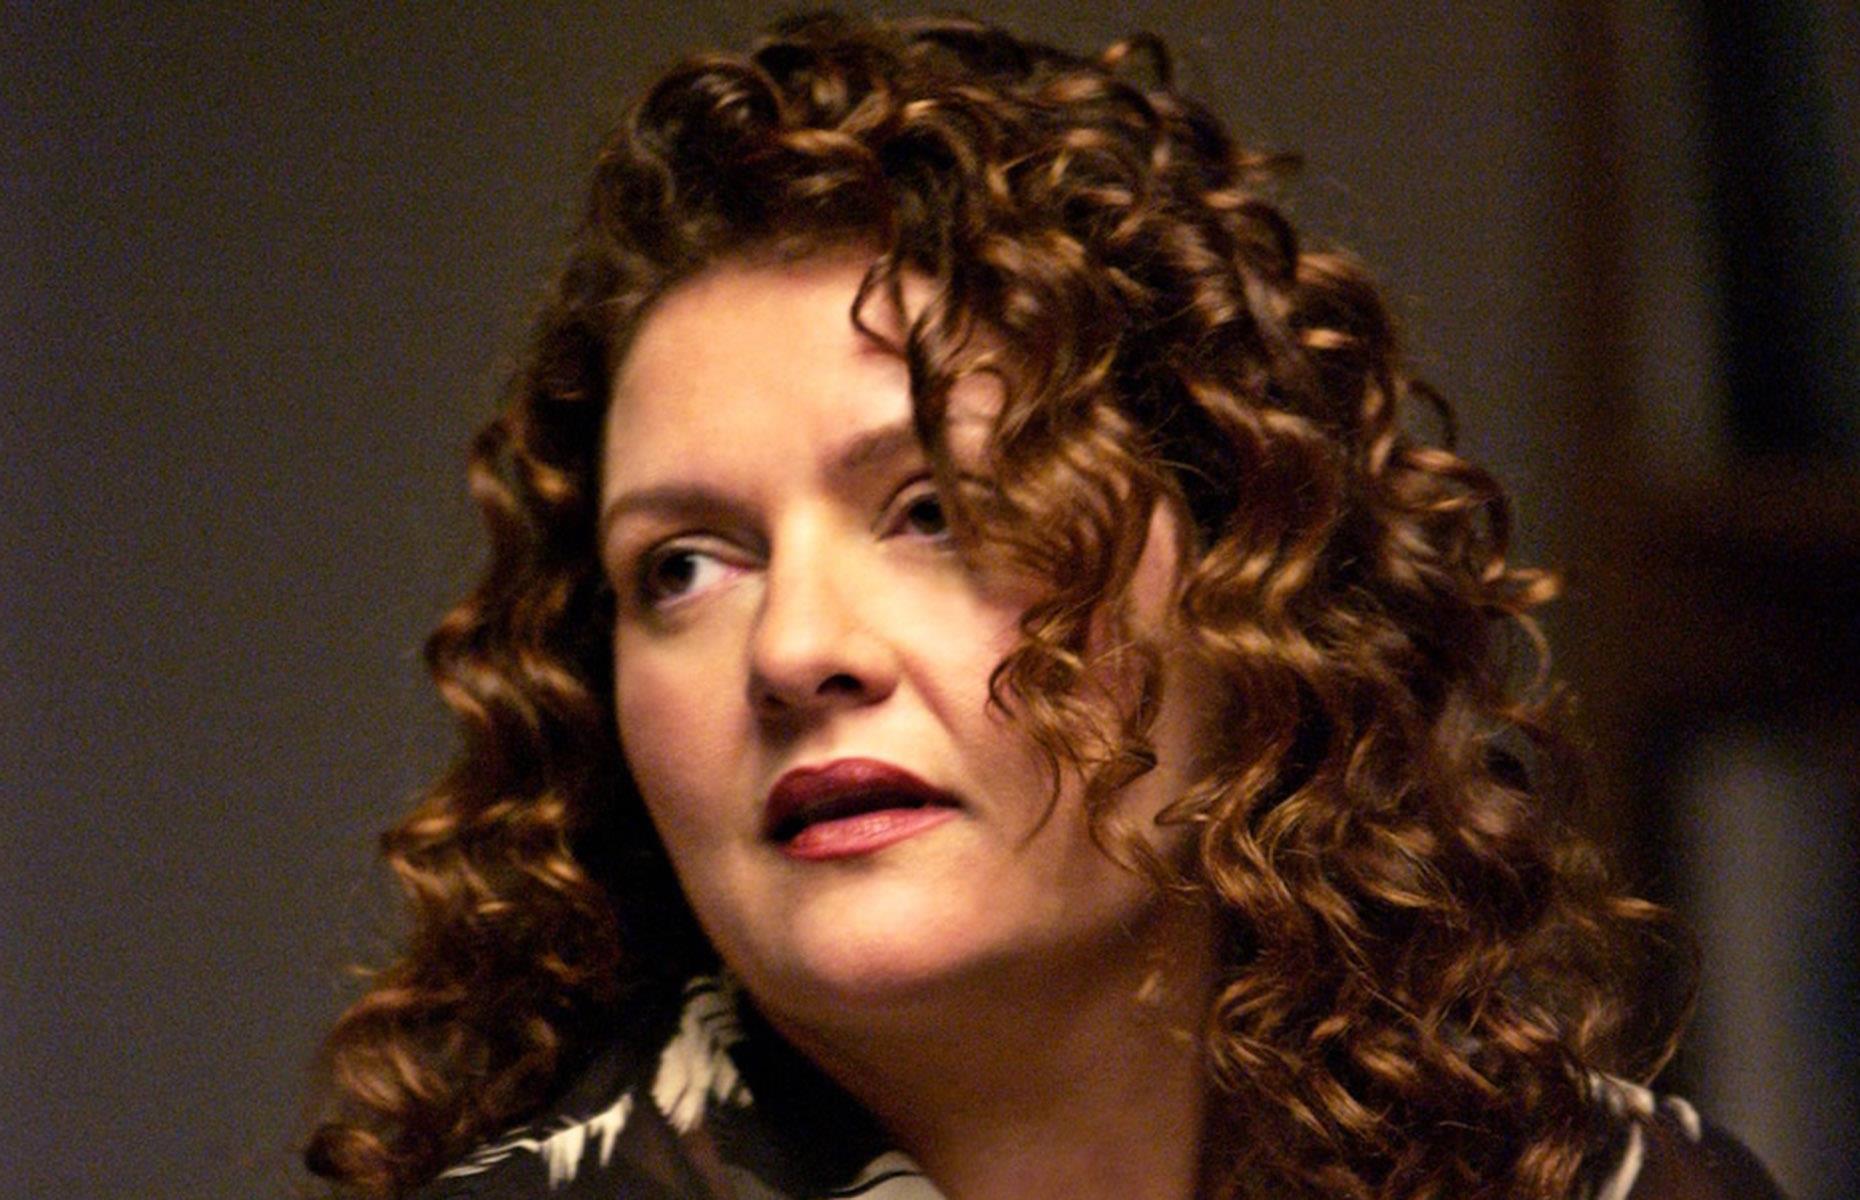 <p>Aida Turturro played Janice Soprano, the manipulative and cunning older sister of Tony. She joined the show in season two and remained until its conclusion in 2007.</p>  <p>While <em>The Sopranos</em> signalled a big break for Turturro, she was already an established actress before joining the cast, having made her screen debut in the 1989 rom-com <em>True Love</em>.</p>  <p>Other notable credits from her early career included the movies <em>Jersey Girl </em>and<em> Sleepers</em>, and the TV show <em>Law & Order</em>.</p>